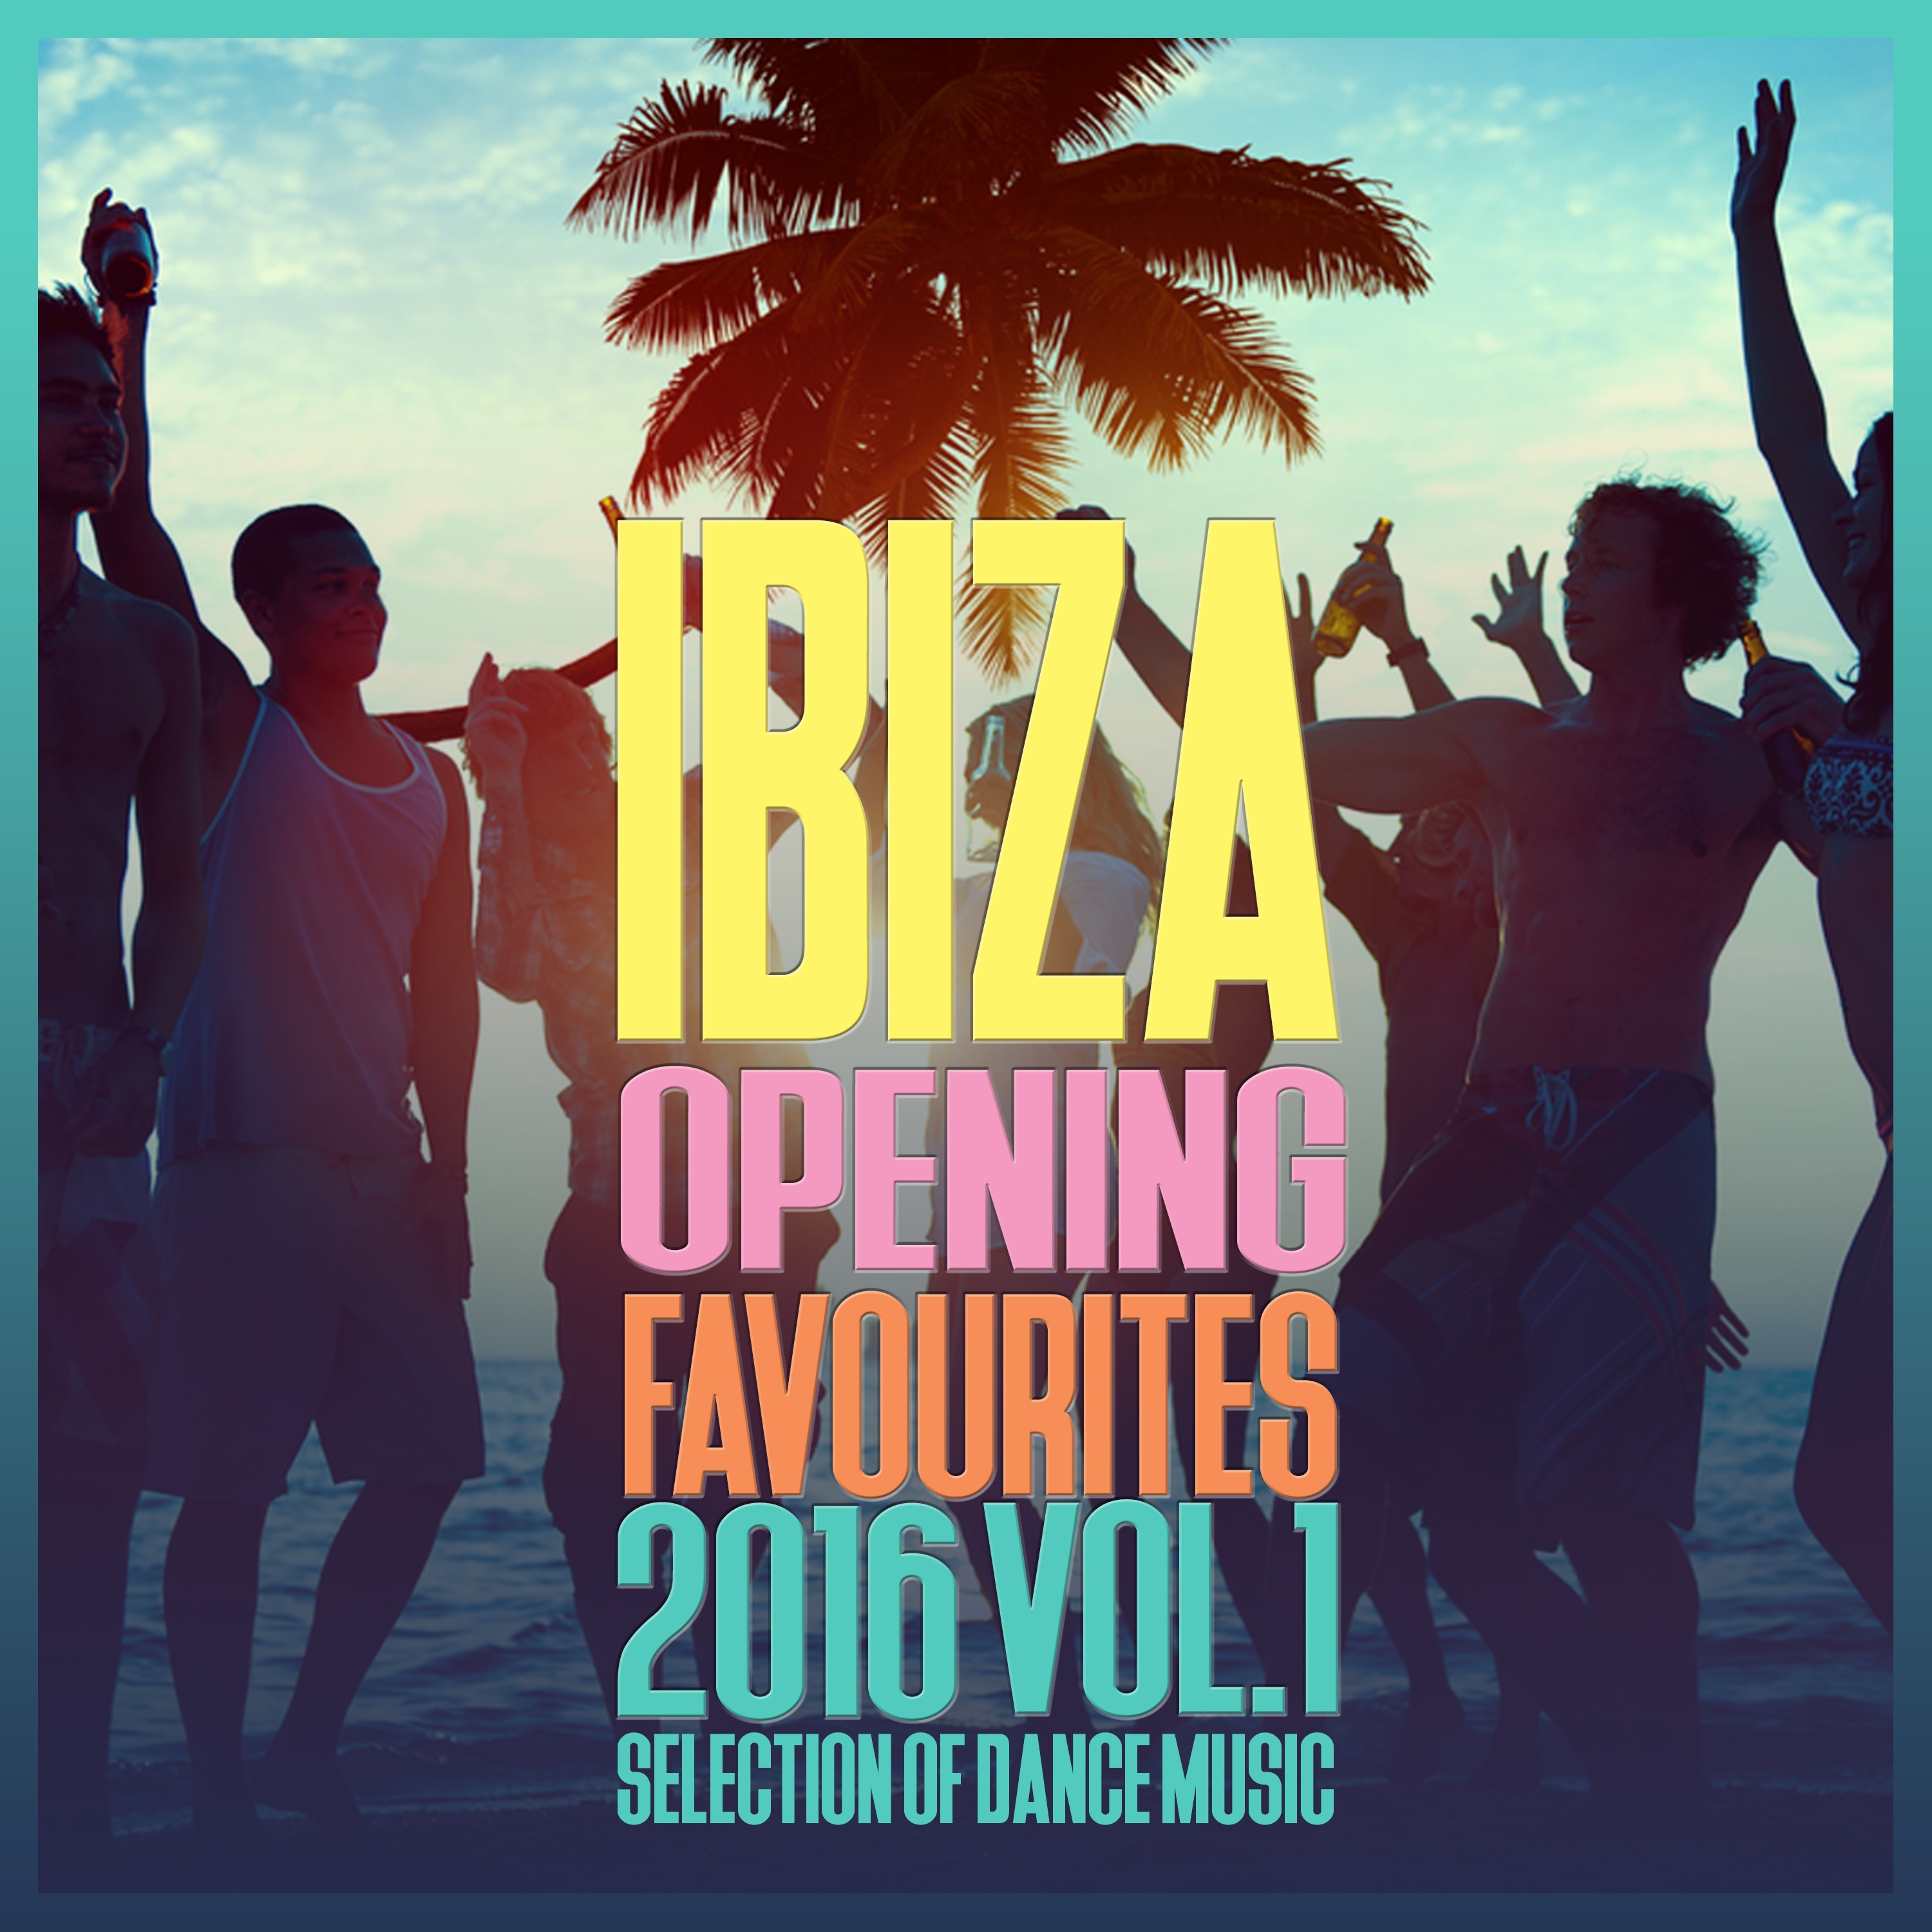 Ibiza Opening Favourites 2016, Vol. 1 - Selection of Dance Music